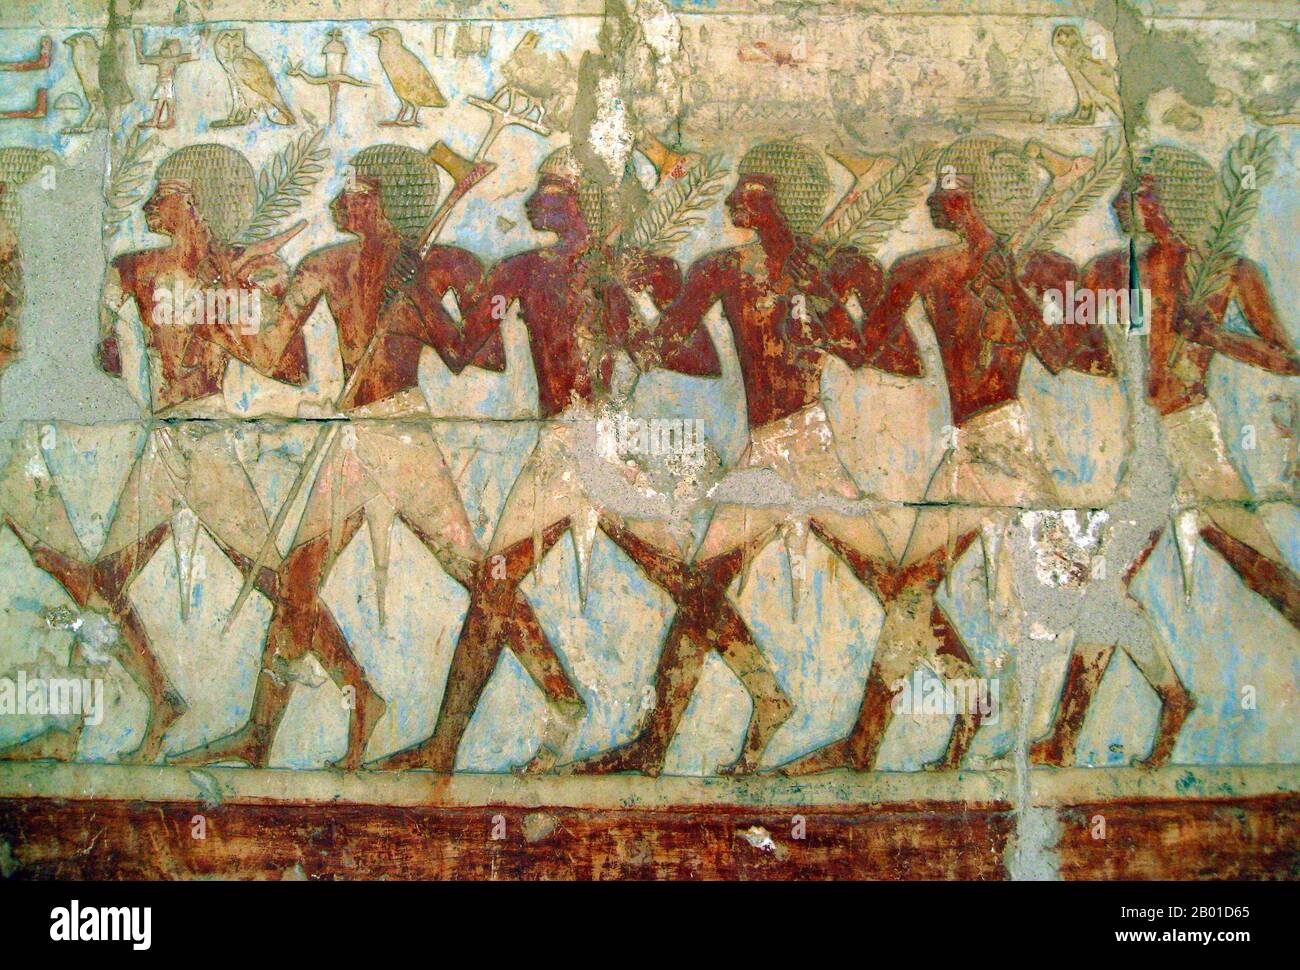 Egypt: Soldiers from Queen Hatshepsut's expedition to the Land of Punt as depicted from her temple at Deir el-Bahri, c. 1480 BCE. Photo by Σταύρος (CC BY 2.0 License).  Hatshepsut established the trade networks that had been disrupted during the Hyksos occupation of Egypt during the Second Intermediate Period, thereby building the wealth of the eighteenth dynasty.  She oversaw the preparations and funding for a mission to the Land of Punt. The expedition set out in her name with five ships, each measuring 70 feet (21 m) long bearing several sails and accommodating 210 men. Stock Photo